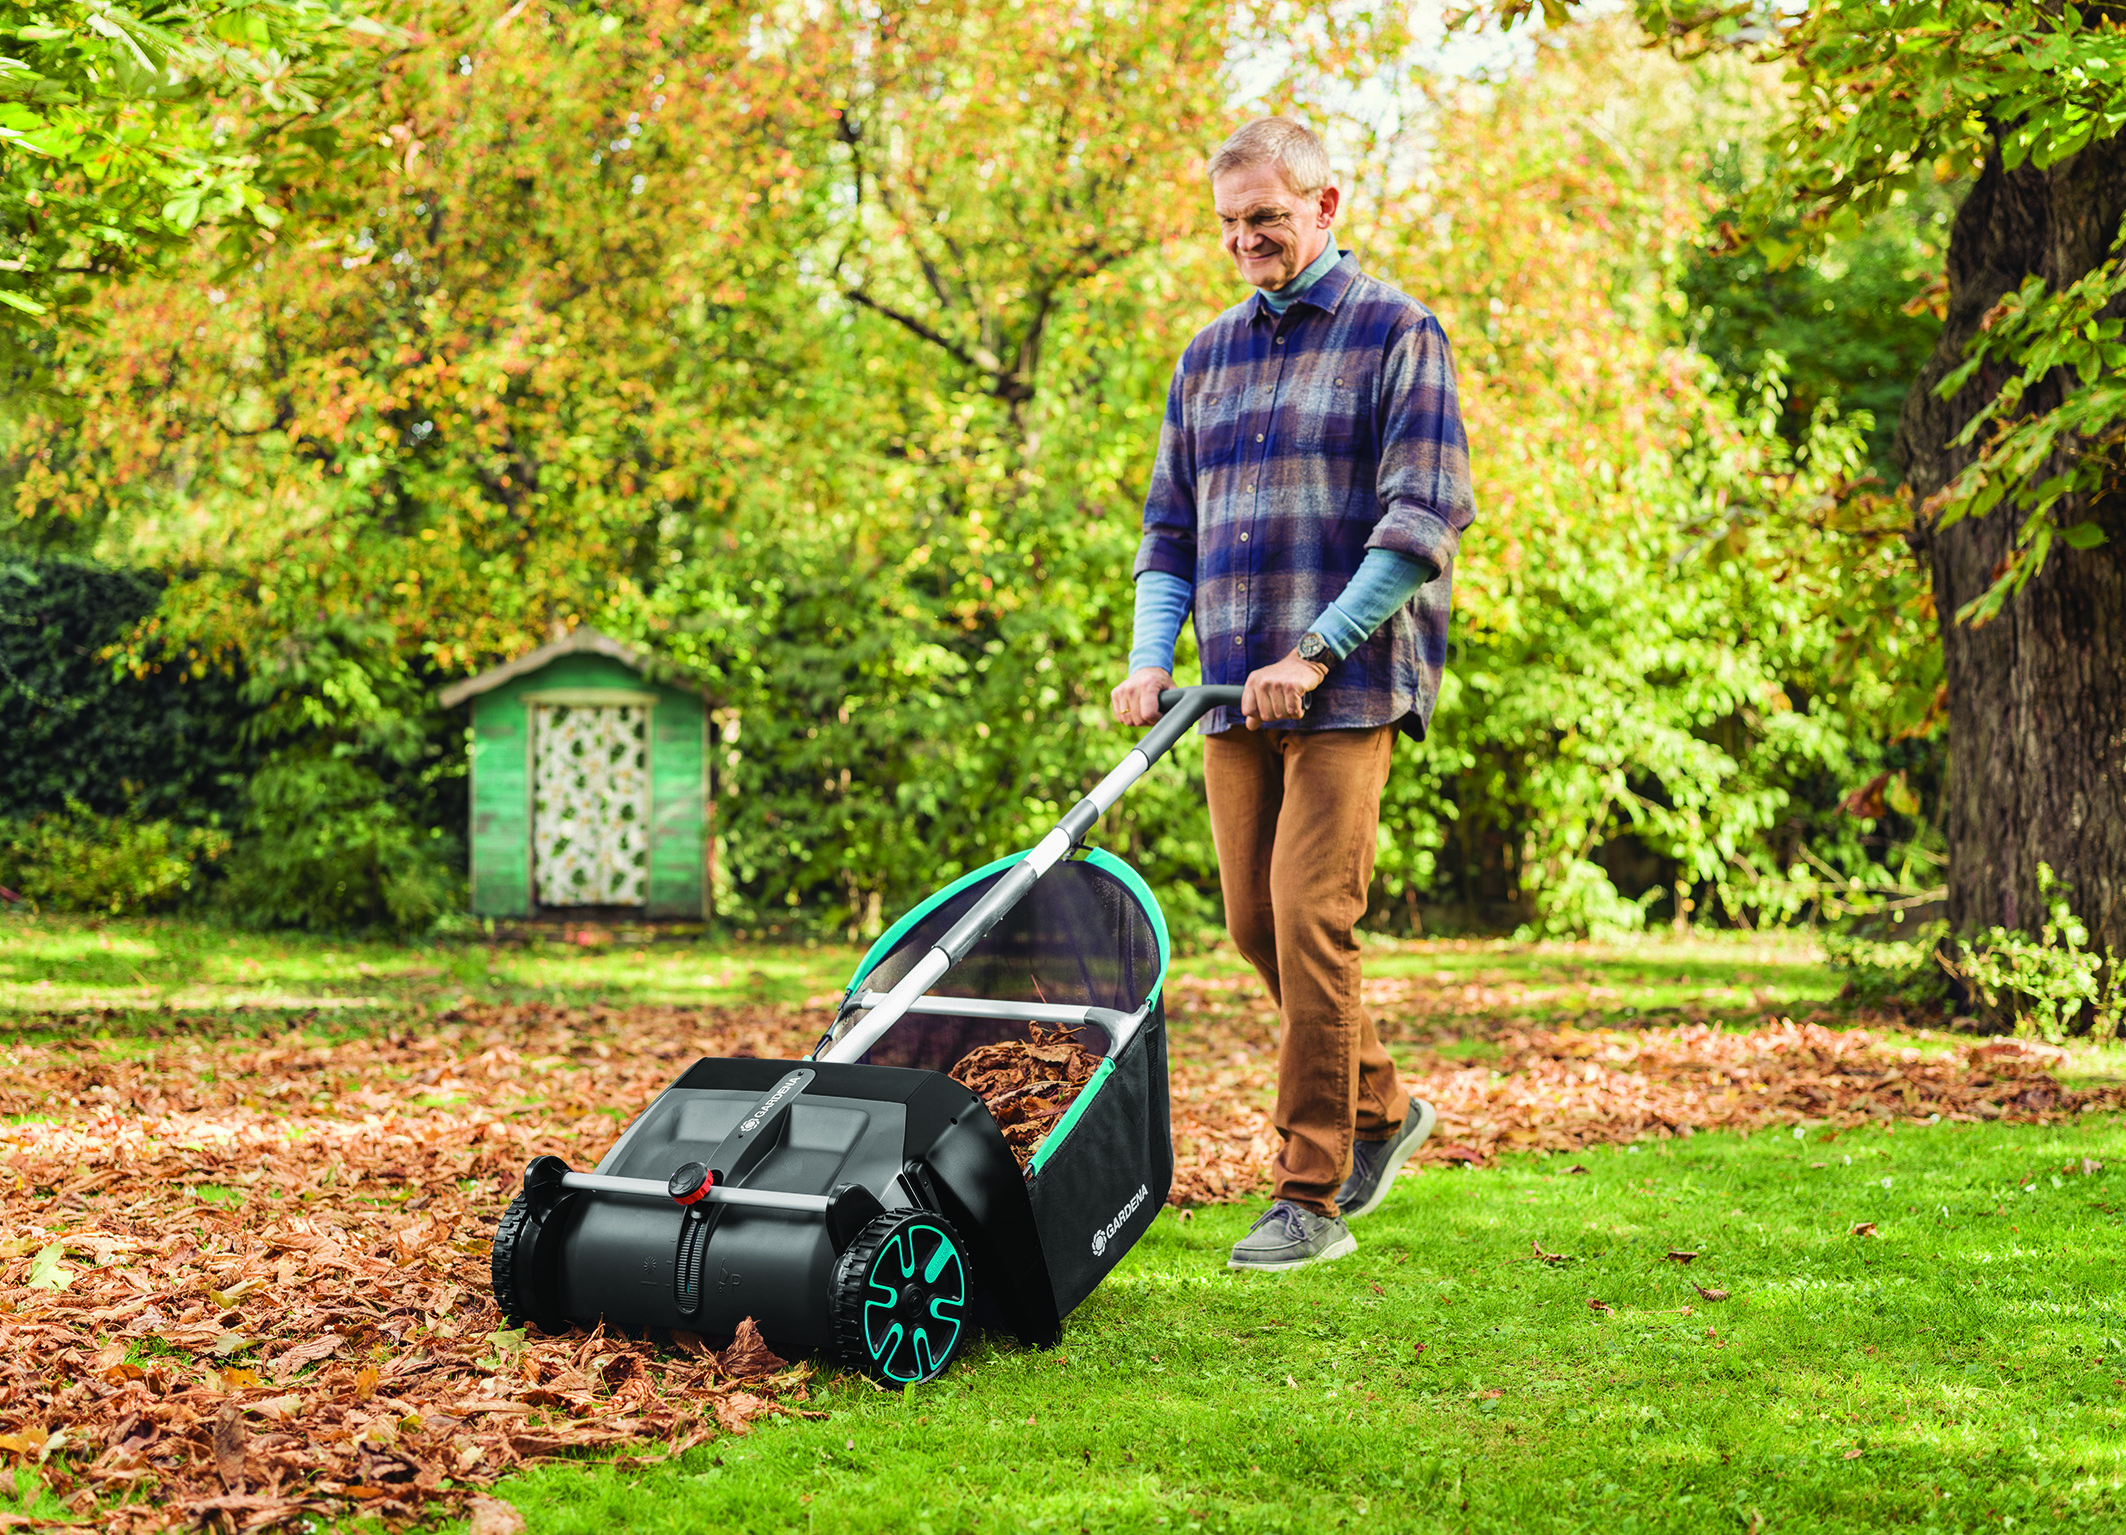 The new GARDENA Leaf- and Grass Collector – already available from autumn 2020